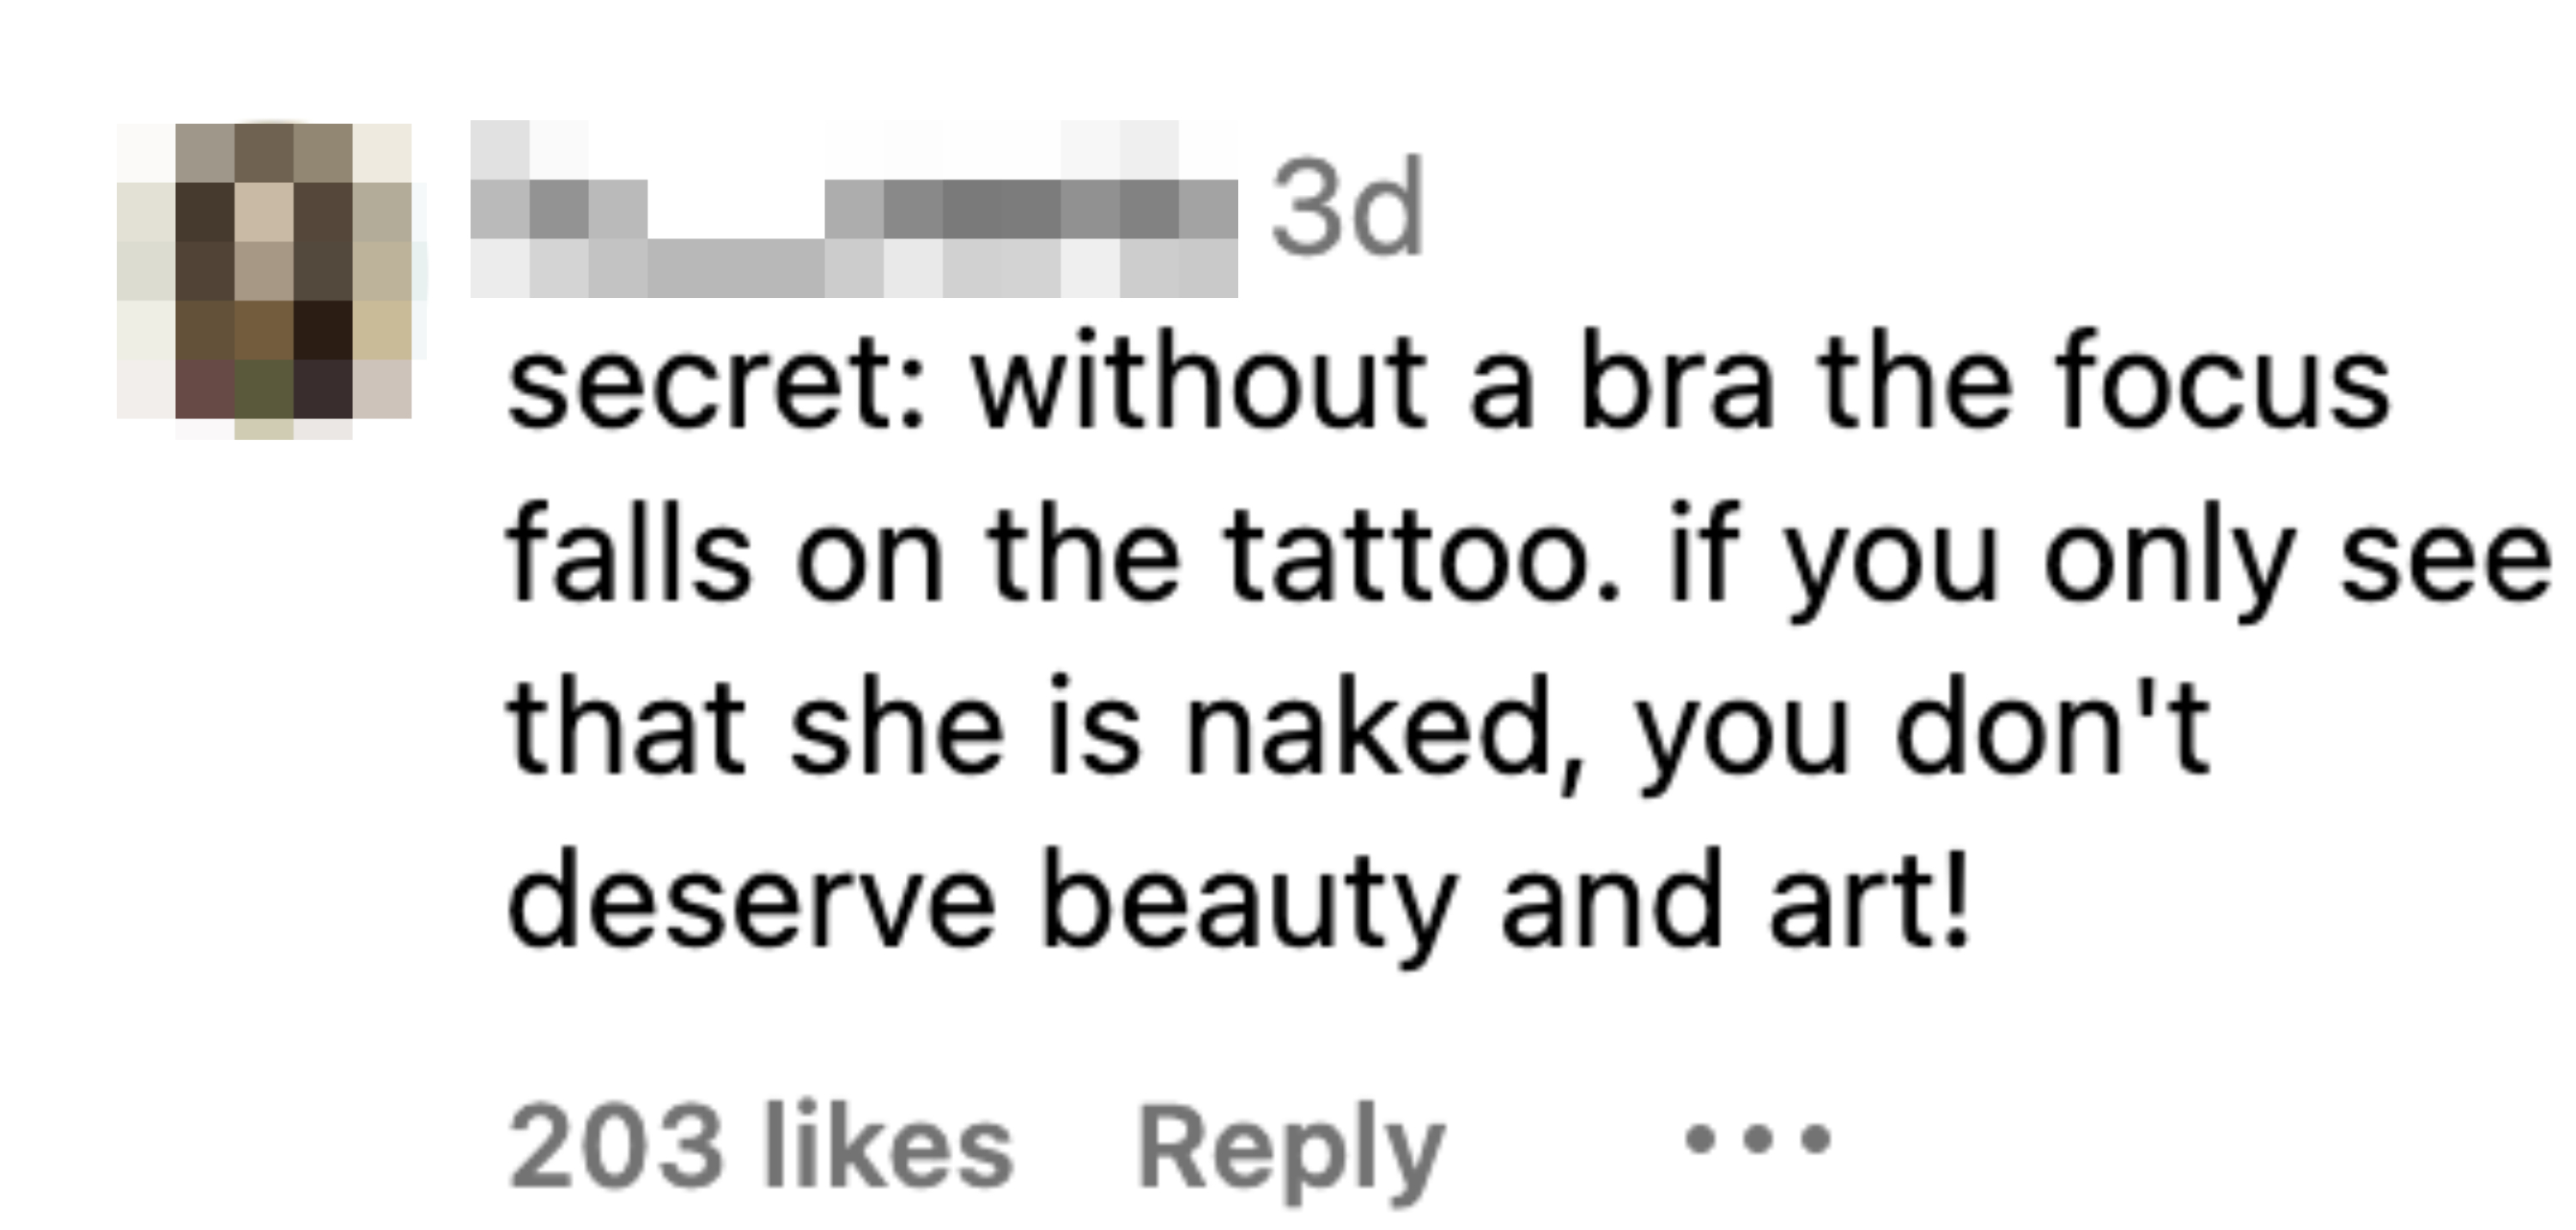 secret: without a bra the focus falls on the tattoo, if you only see that she is naked, you don&#x27;t deserve beauty and art!